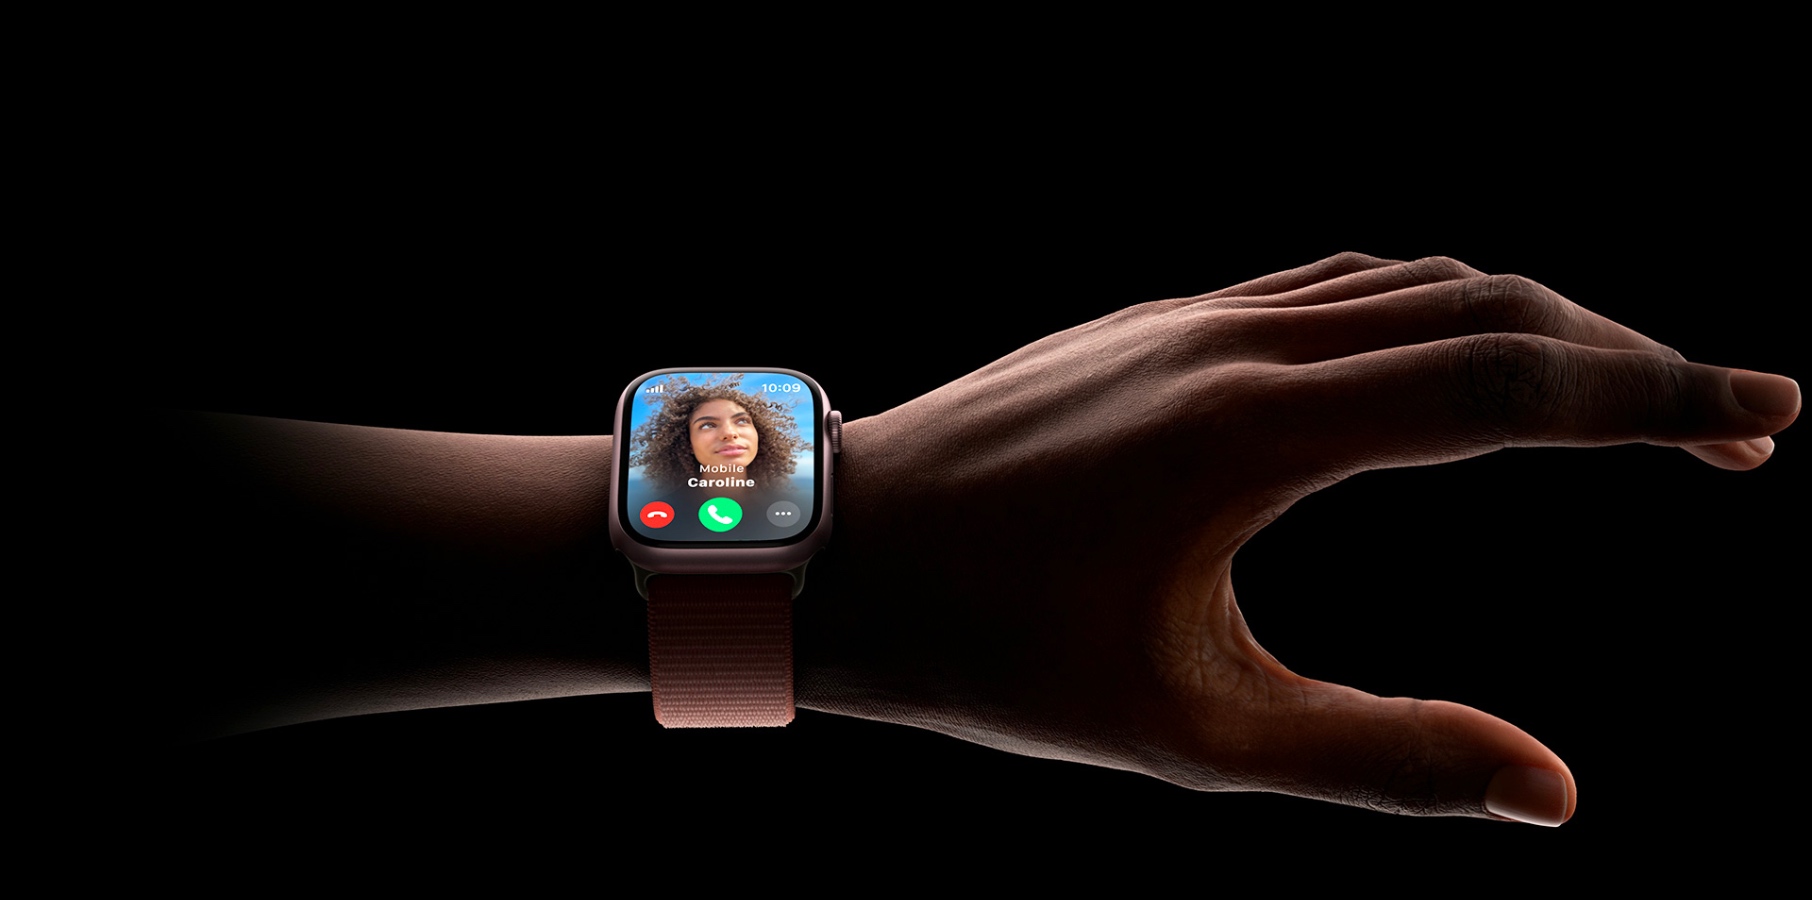 microLED Apple Watch delayed due to production issues - GSMArena.com news